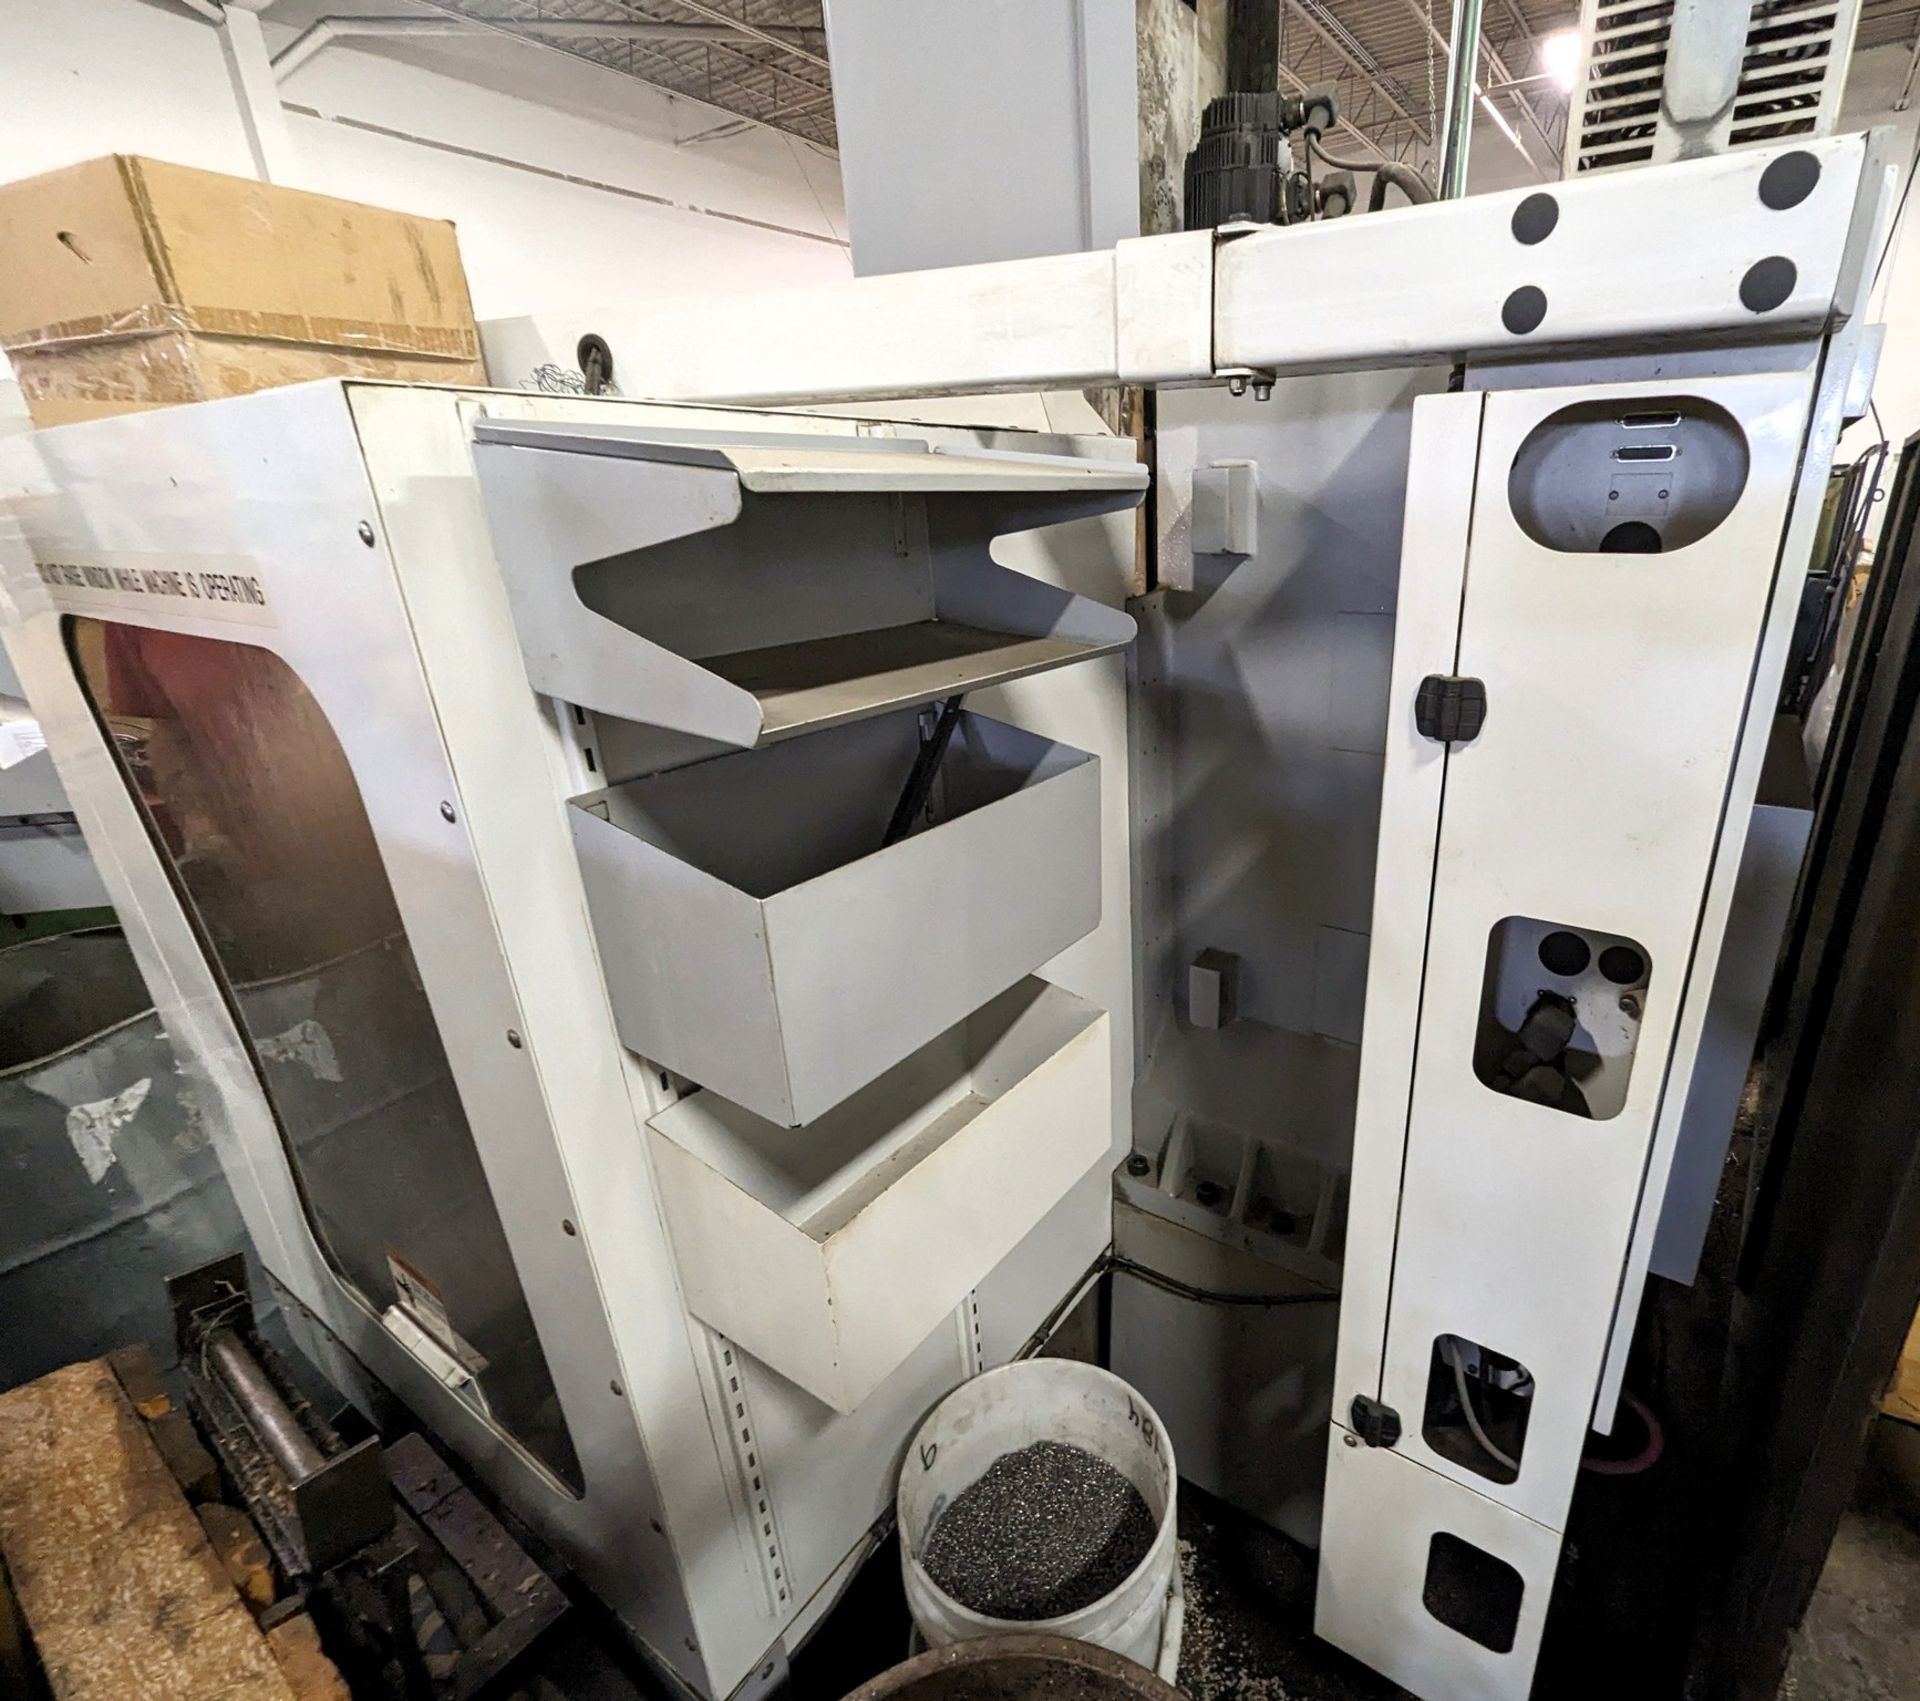 2004 HAAS VF2D CNC VERTICAL MACHINING CENTER, CNC CONTROL, TRAVELS: X-30”, Y-16”, Z-20”, 14” X 36” - Image 12 of 13